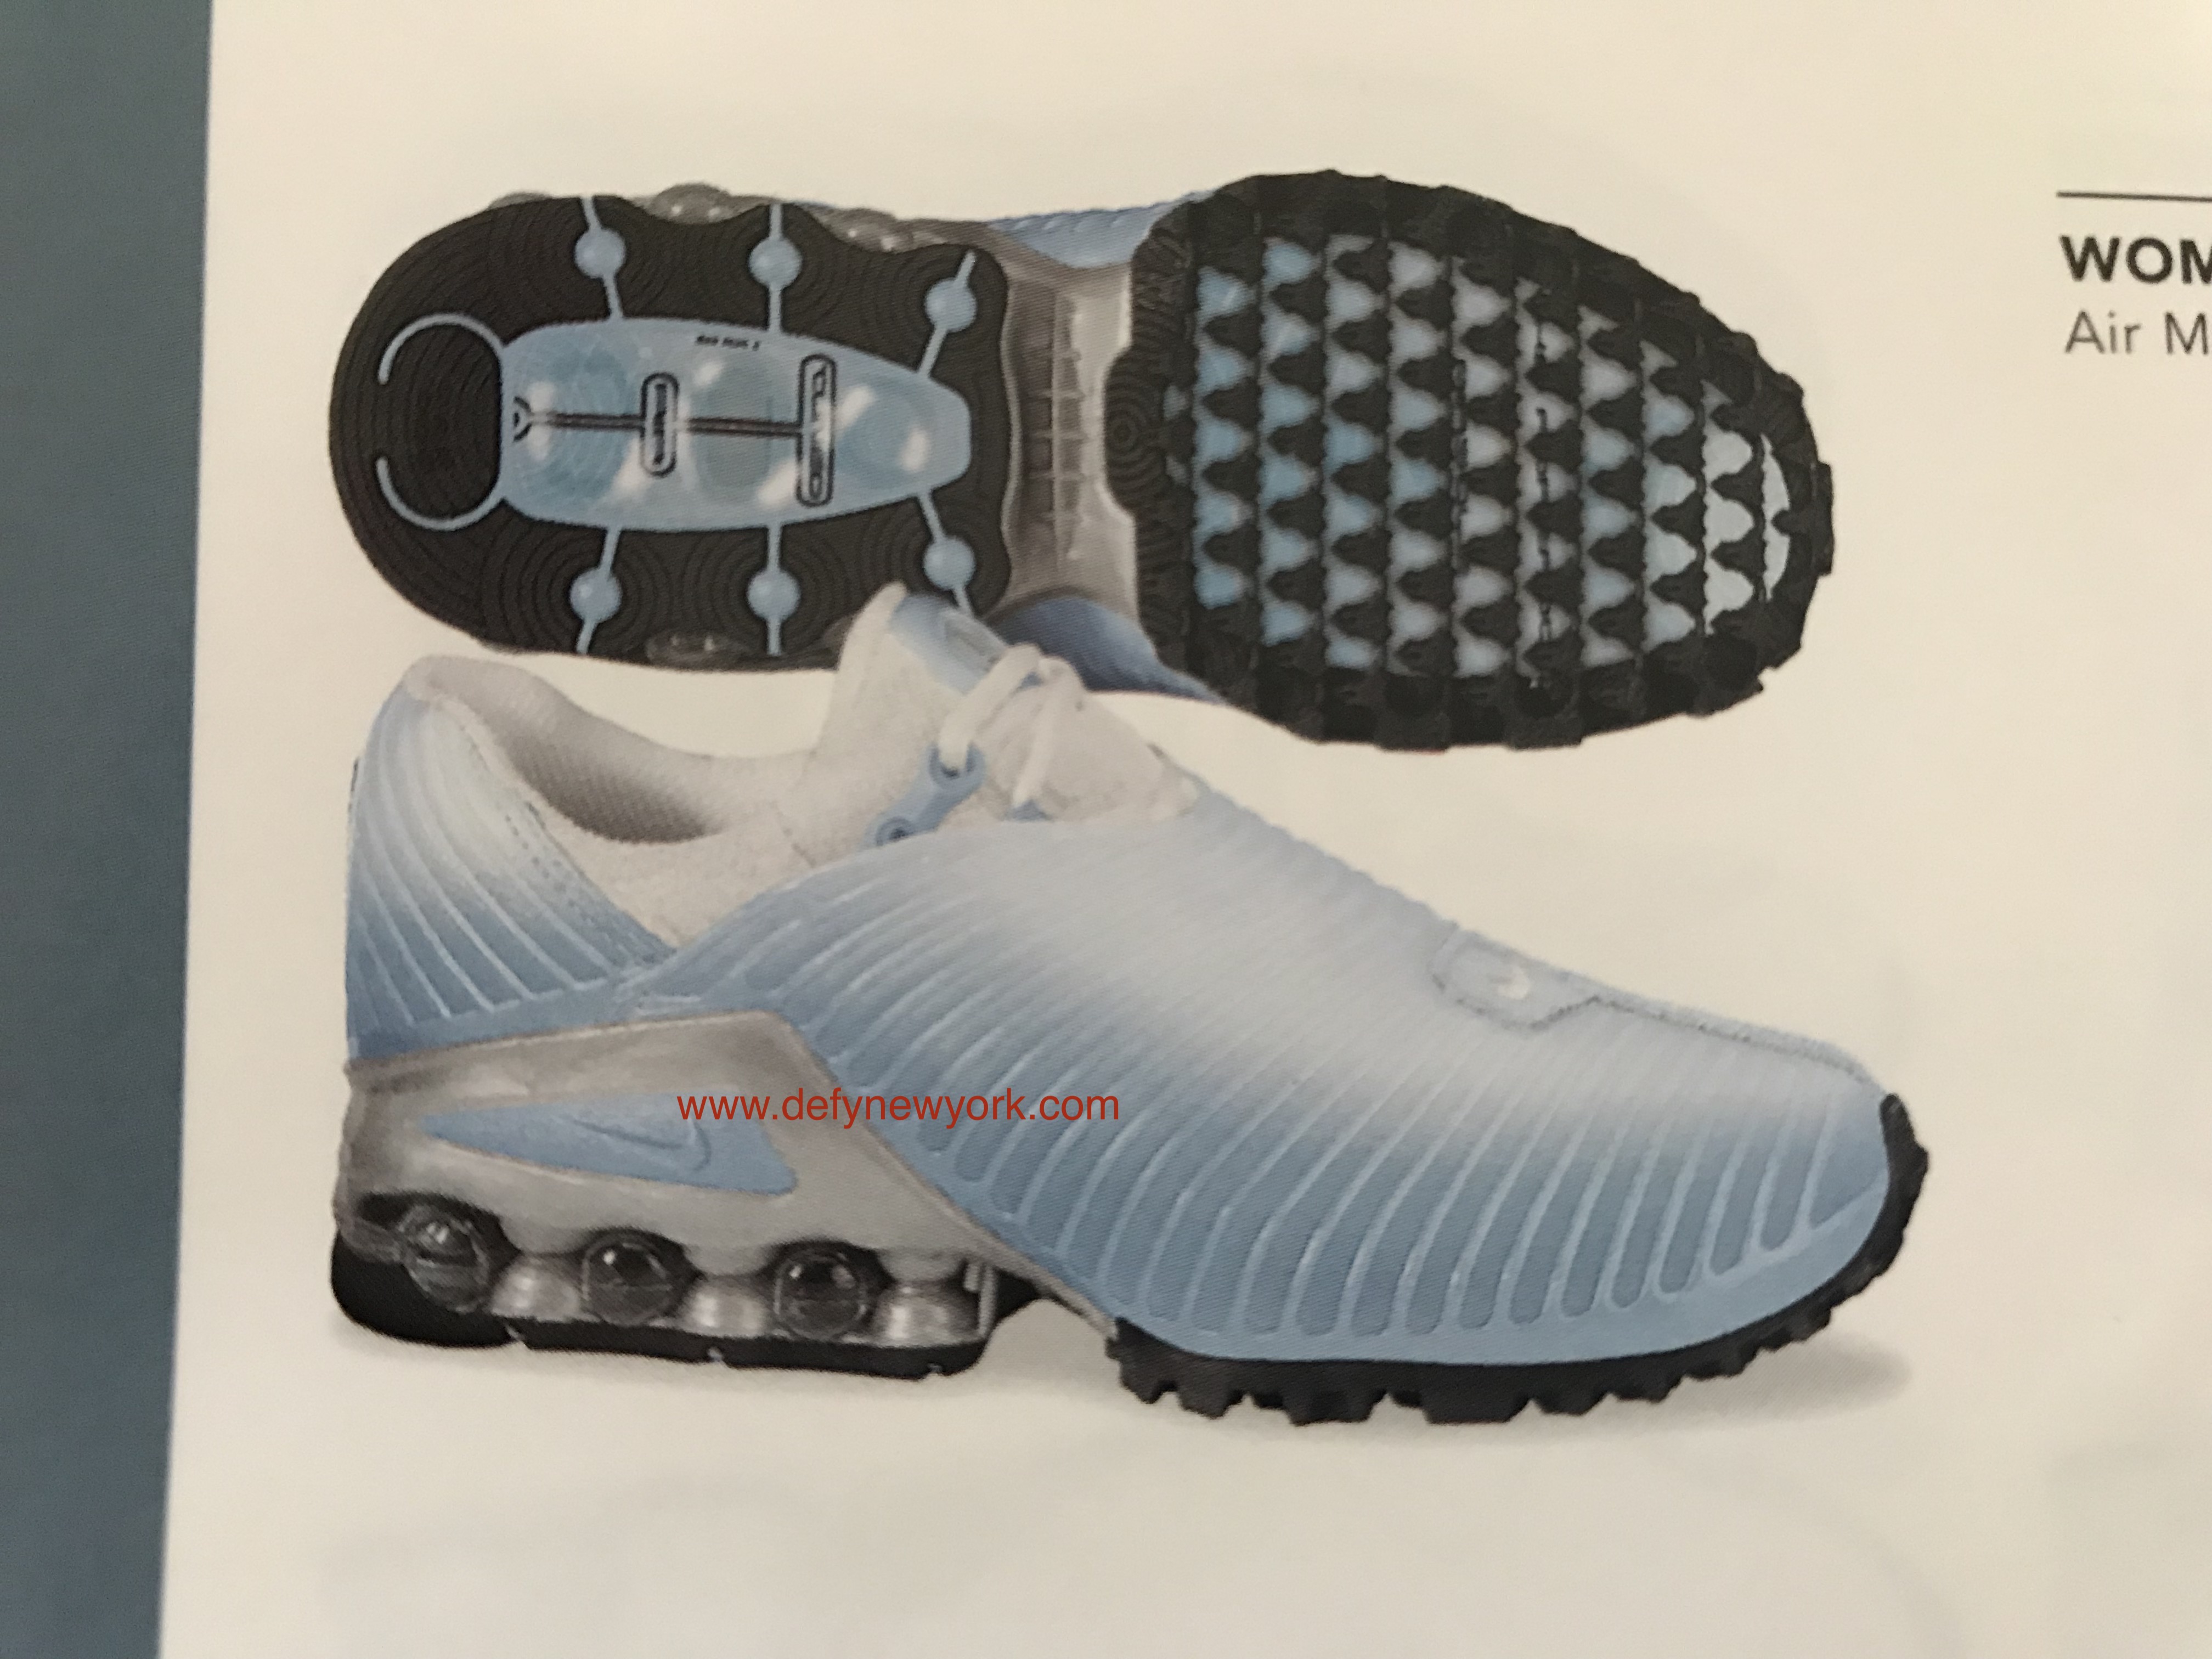 A Look Back At The Nike Air Max Plus V 2002-2003